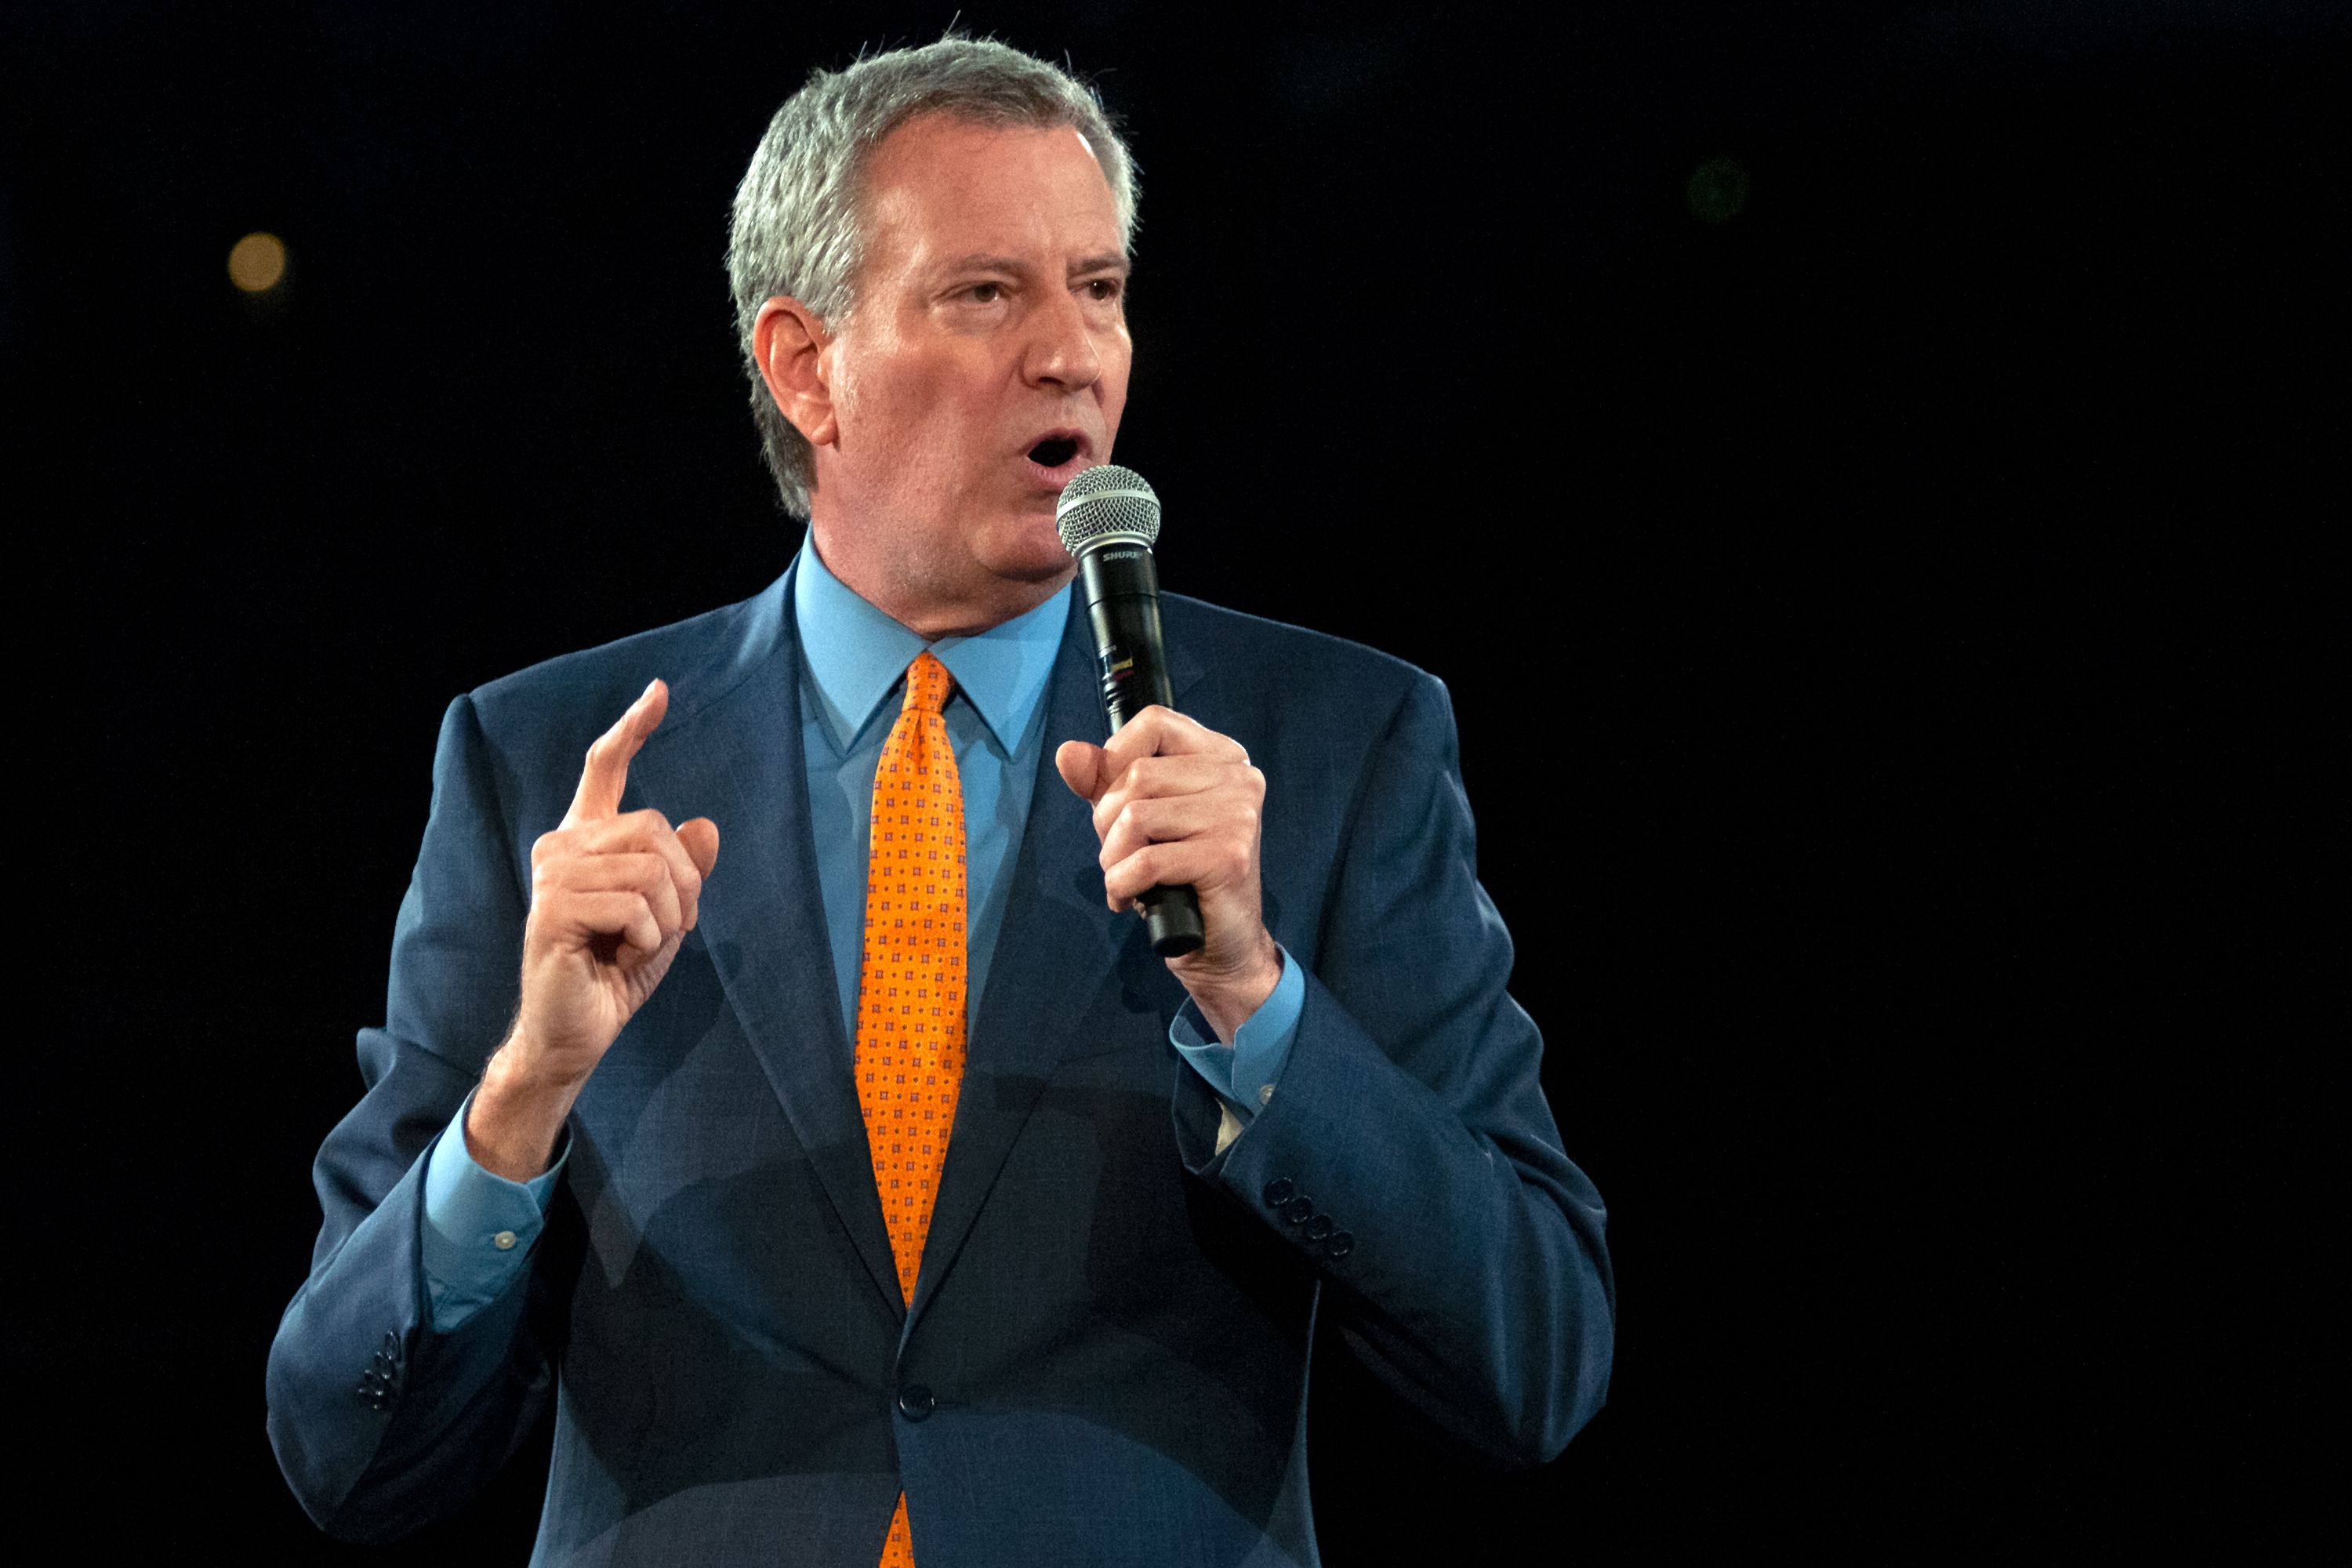 Mayor Bill de Blasio delivers his State of the City address.